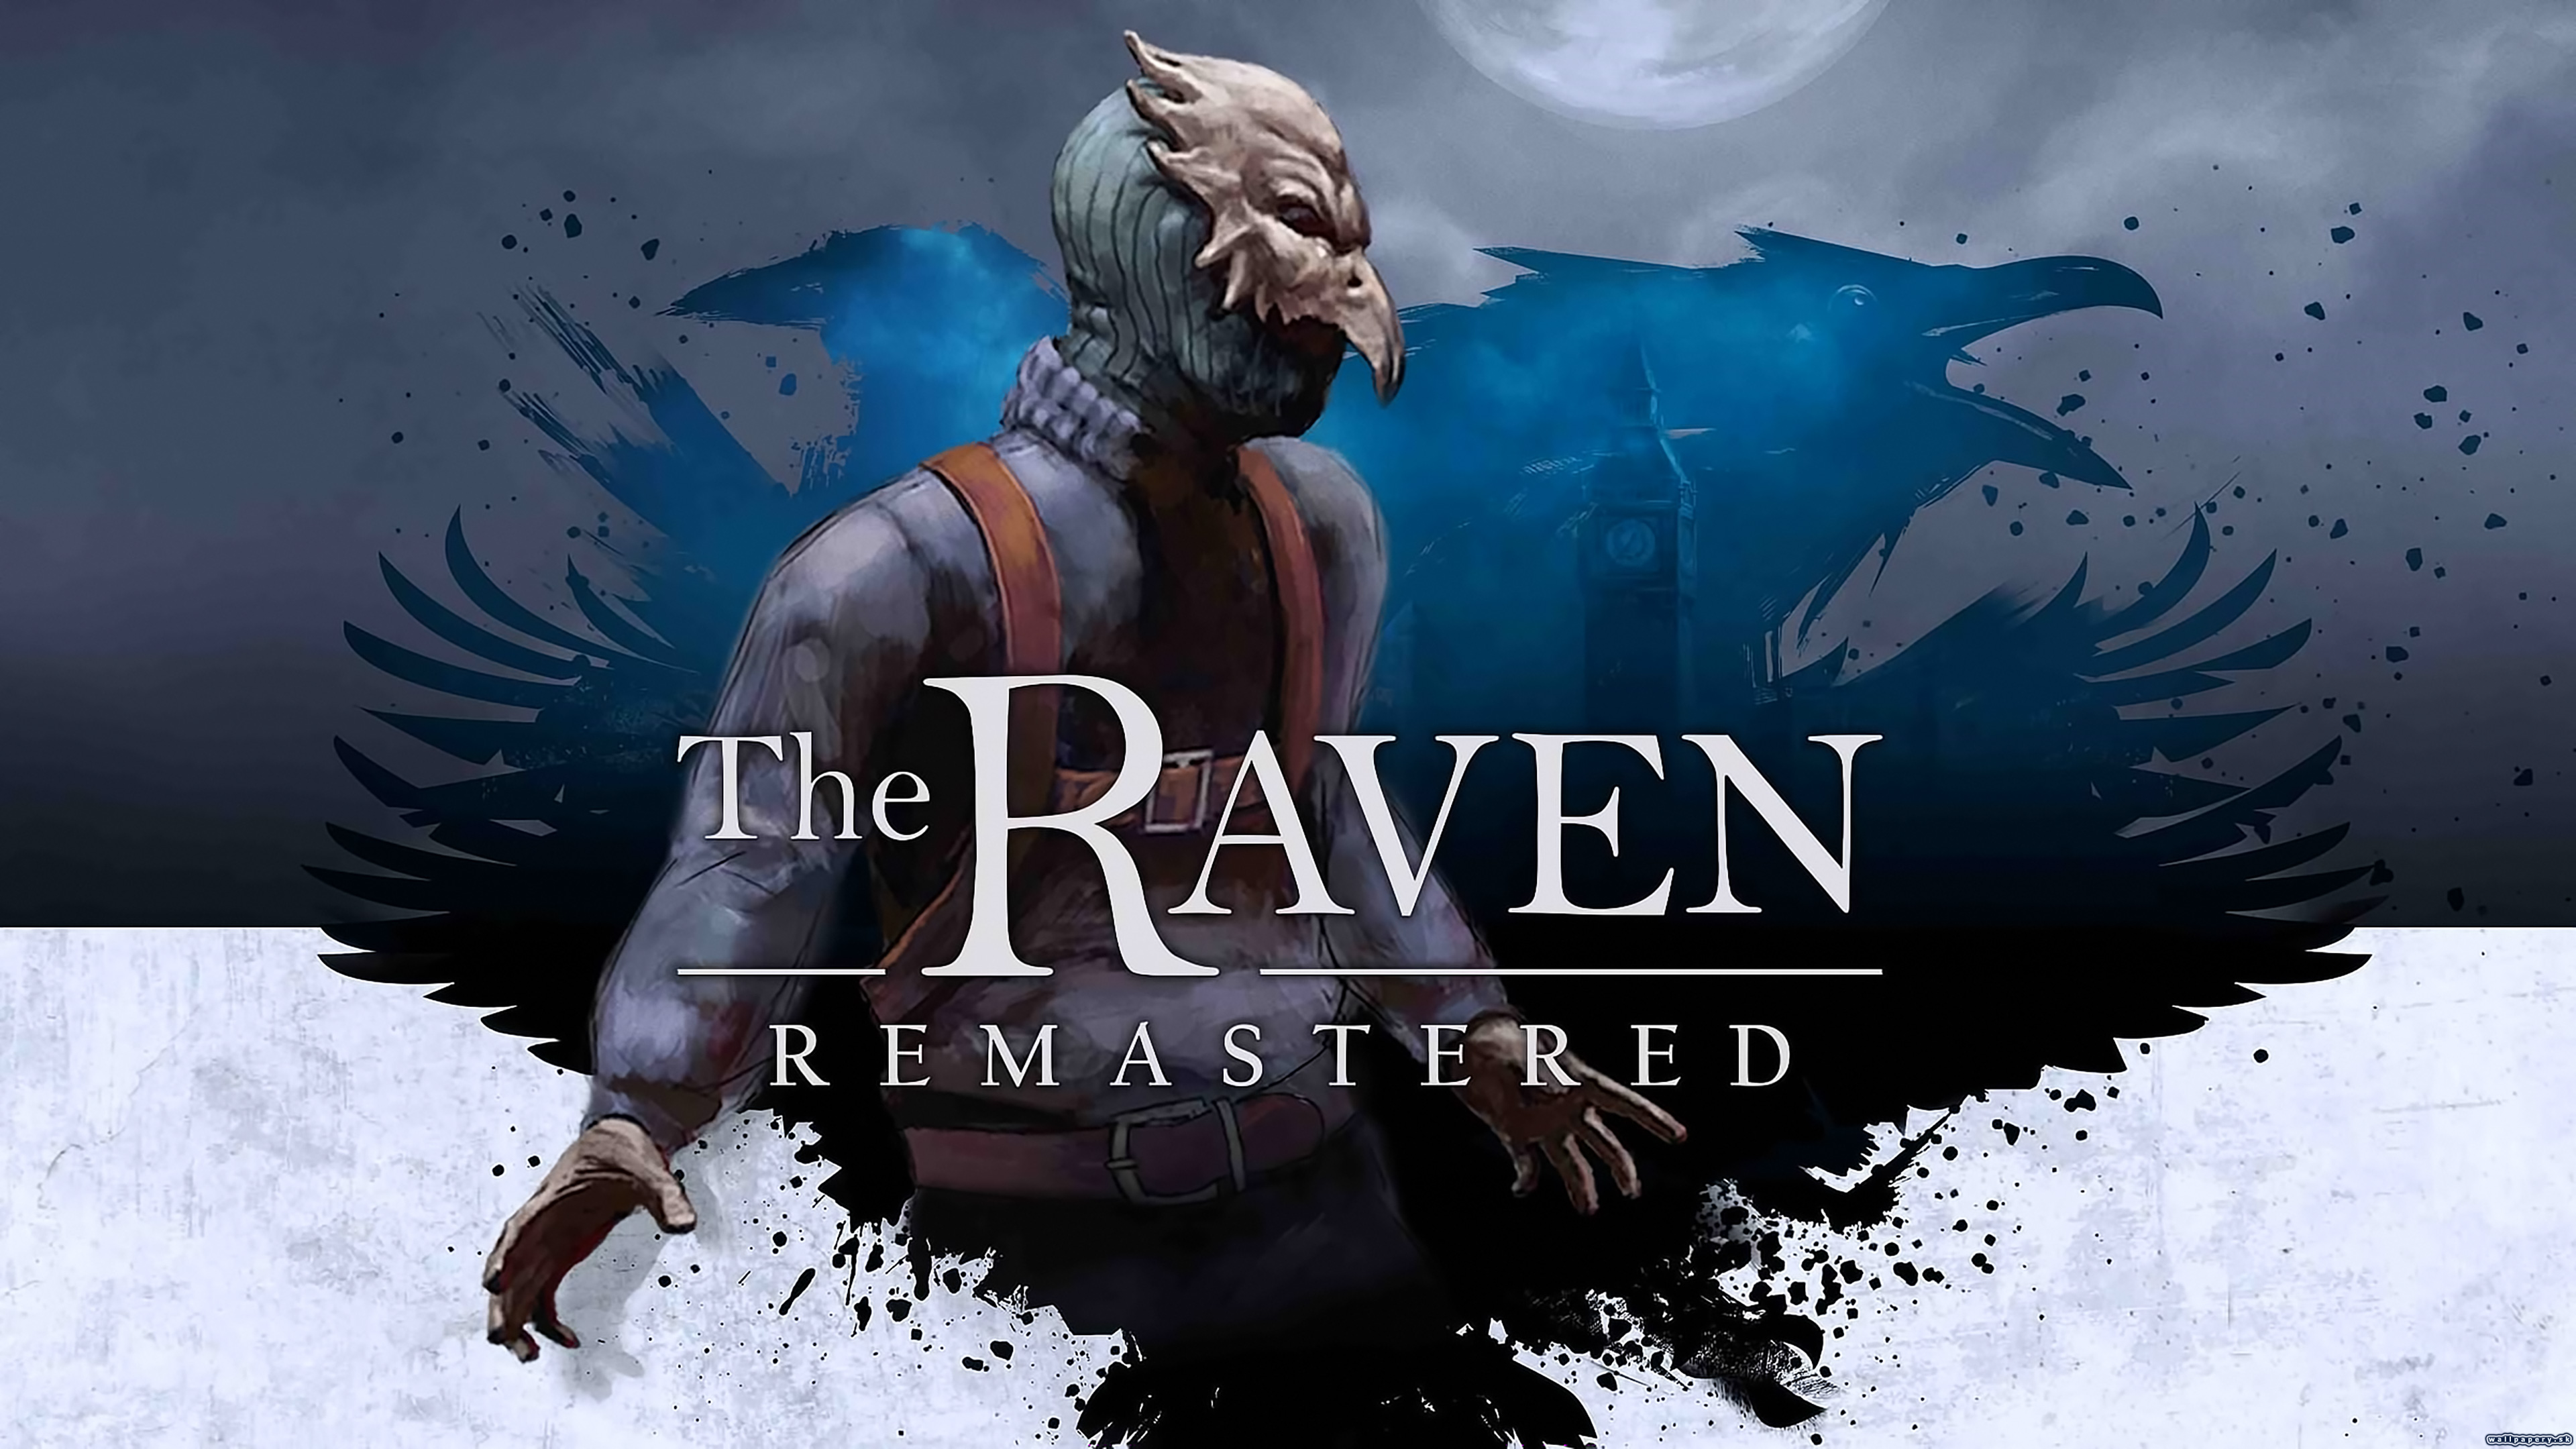 The Raven Remastered - wallpaper 1